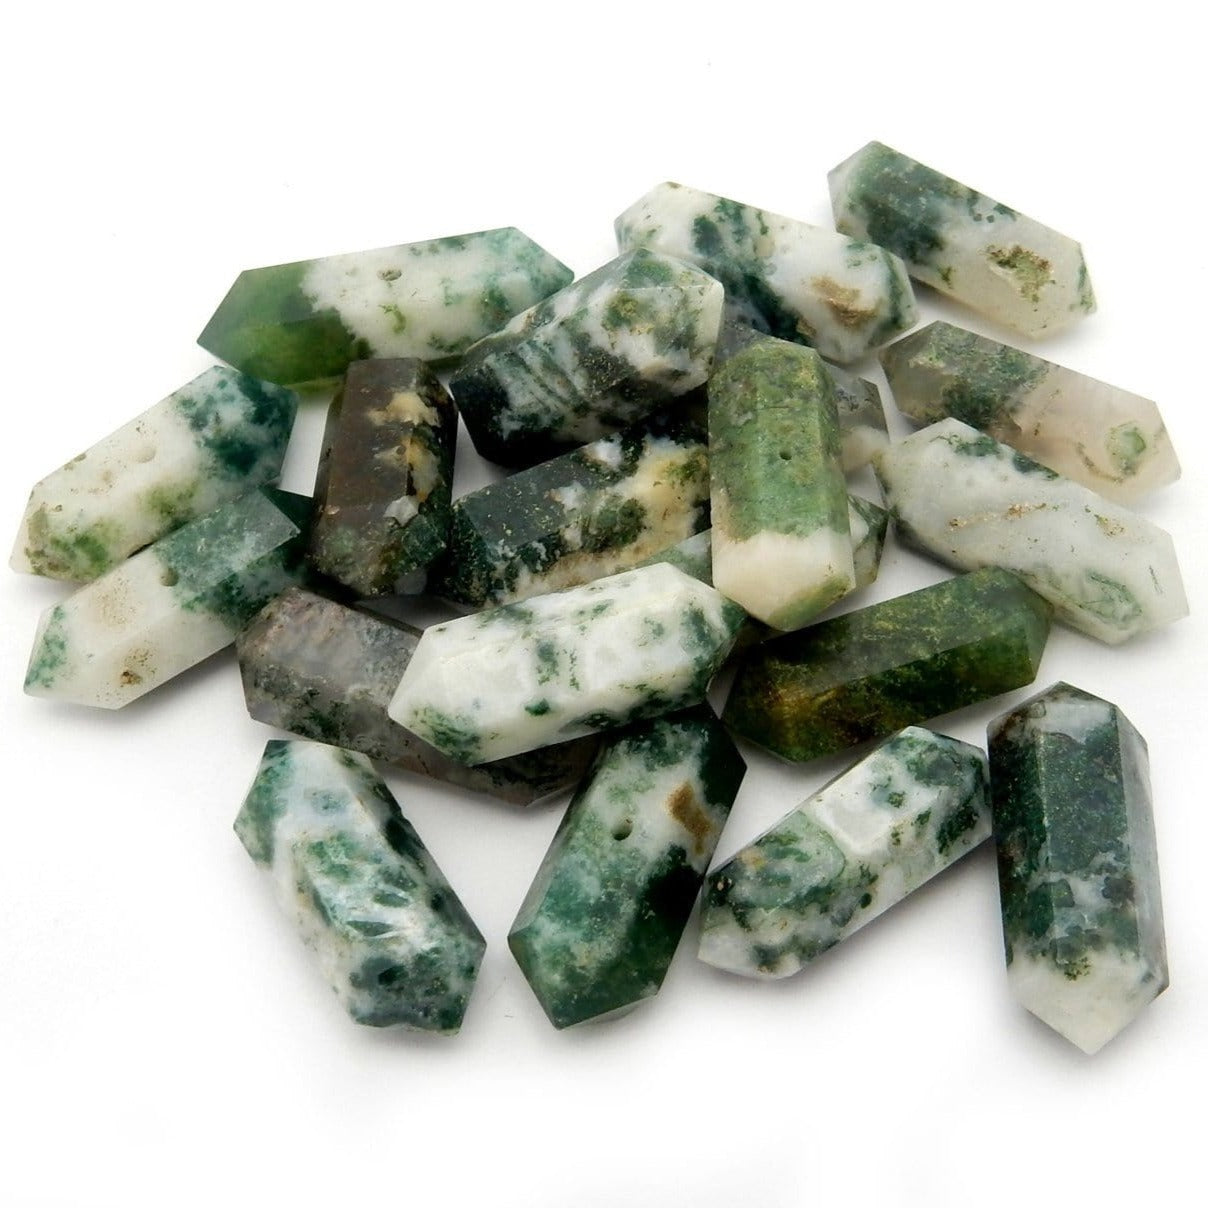 Bundle of Petite Moss Agate Double Terminated Pencil Point in Beautiful shades of green mixed with white